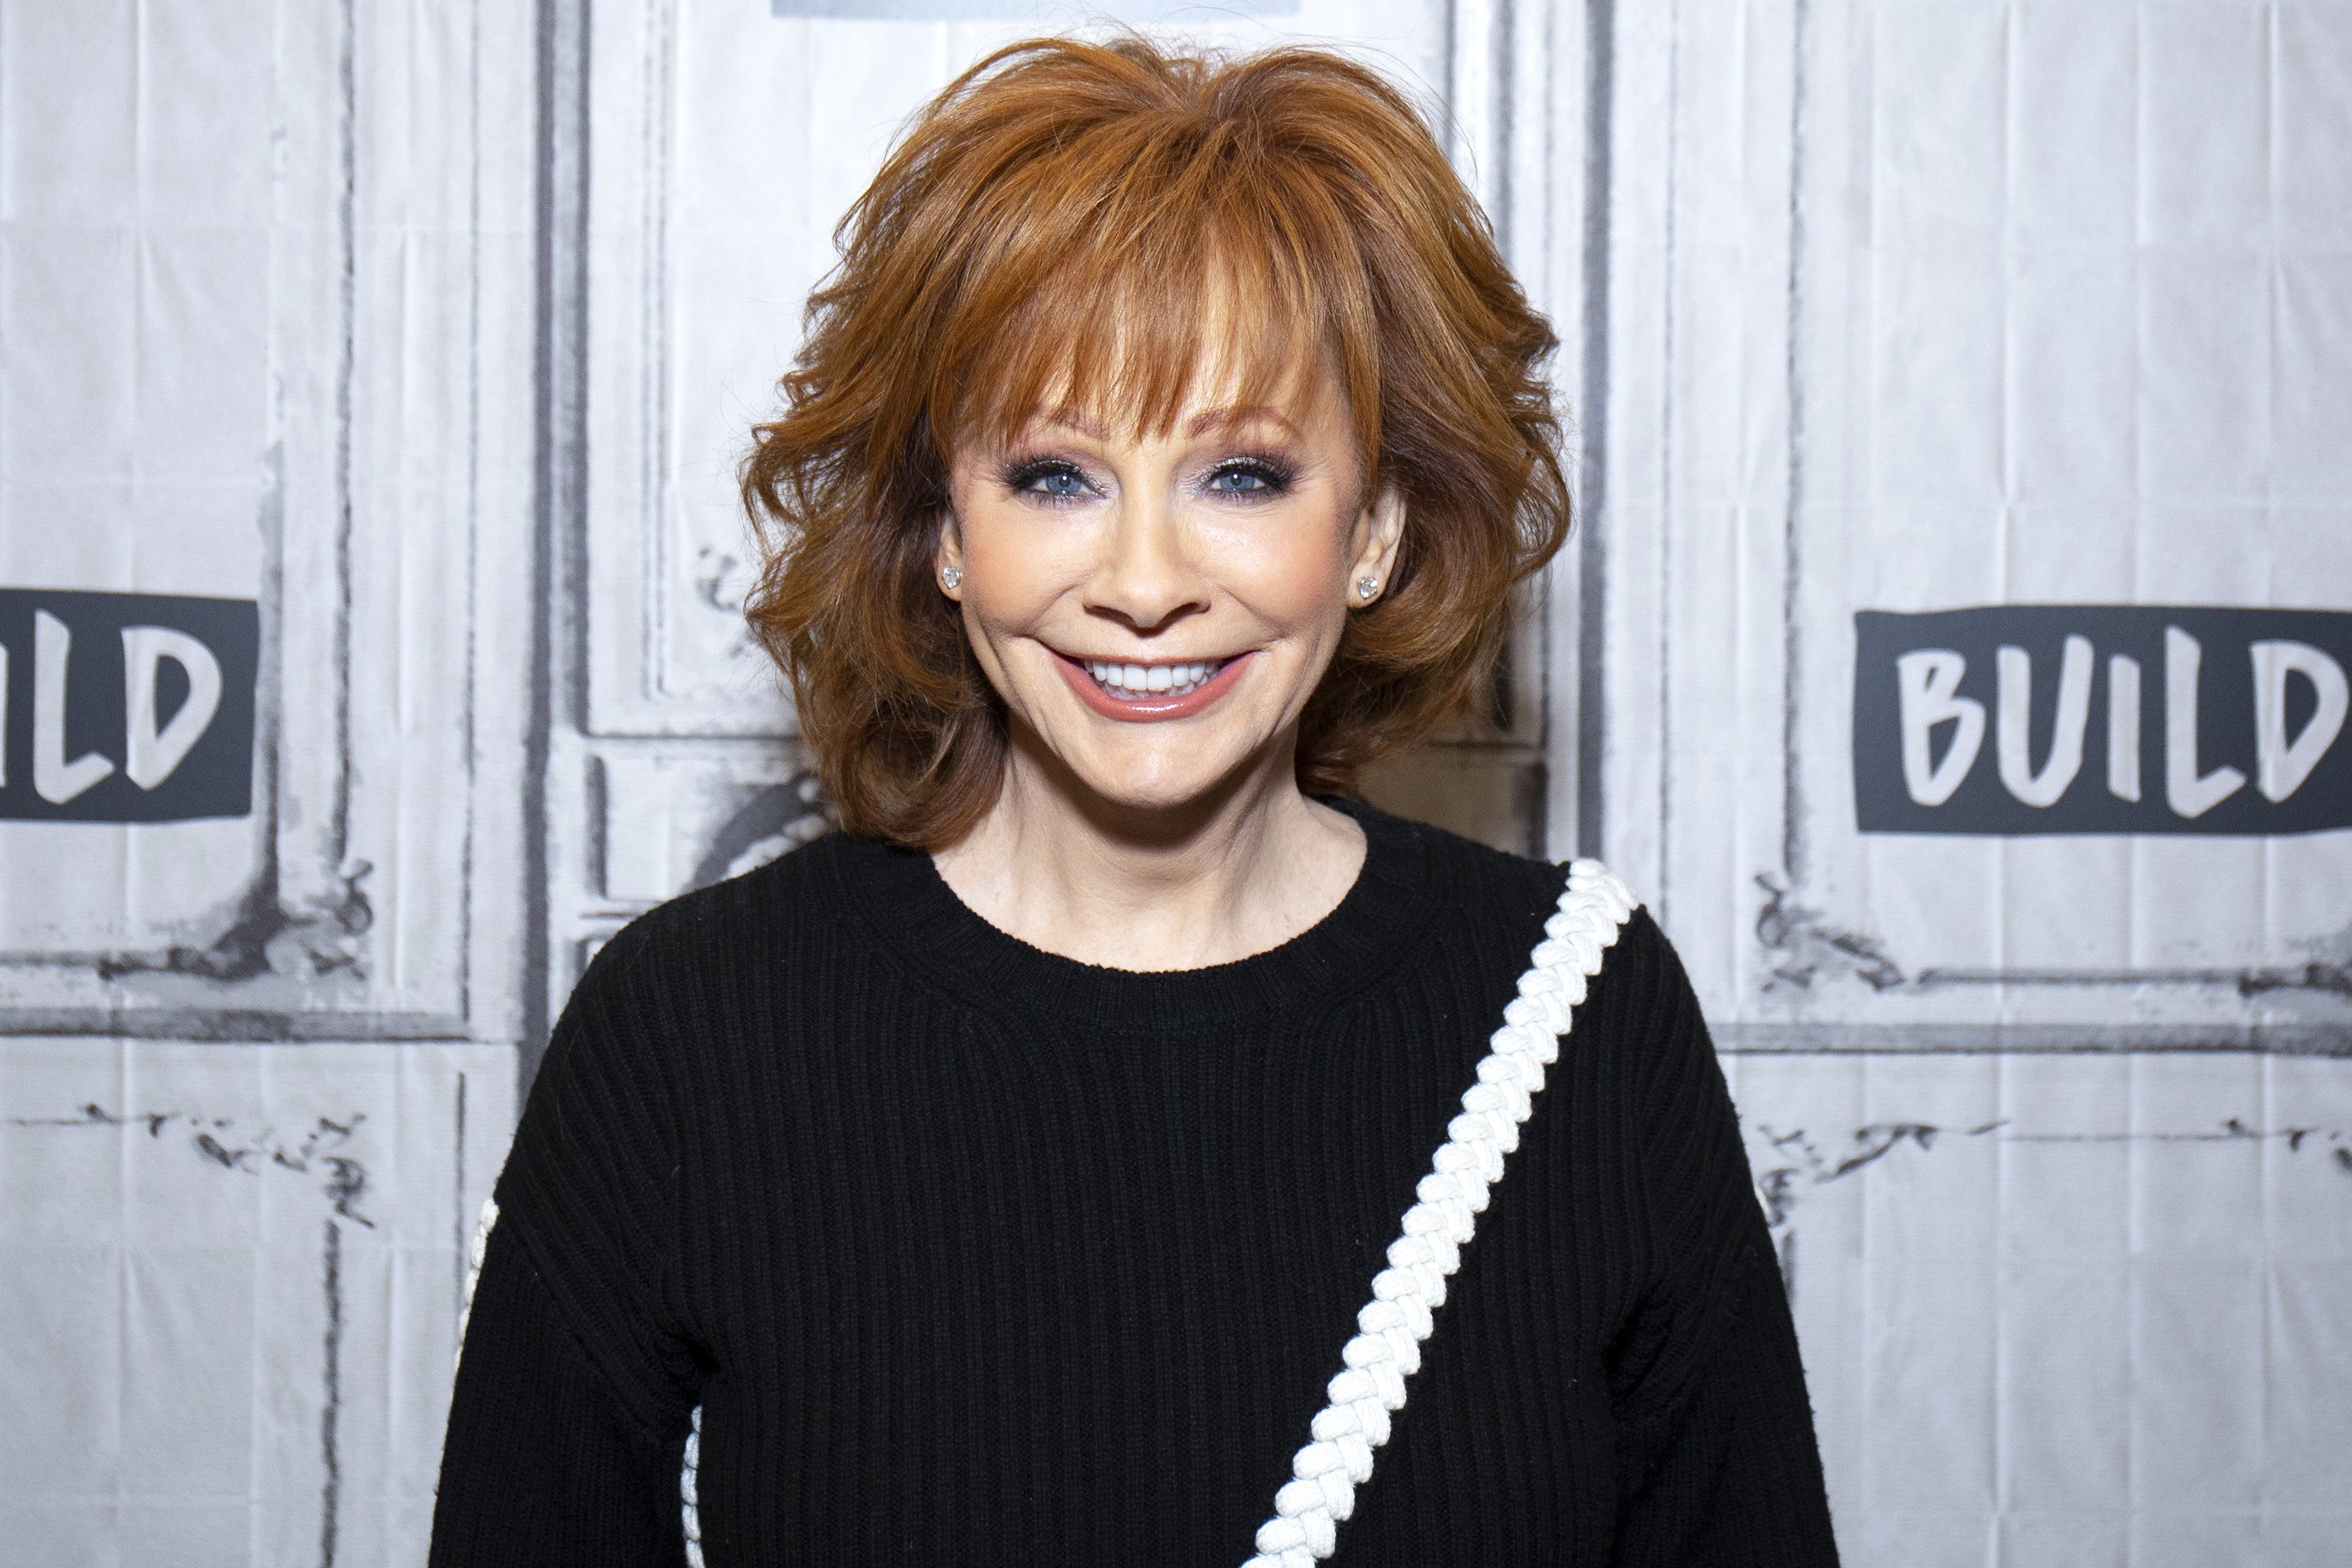 Reba McEntire visits Build Studio on February 20, 2019, in New York City. | Source: Getty Images.